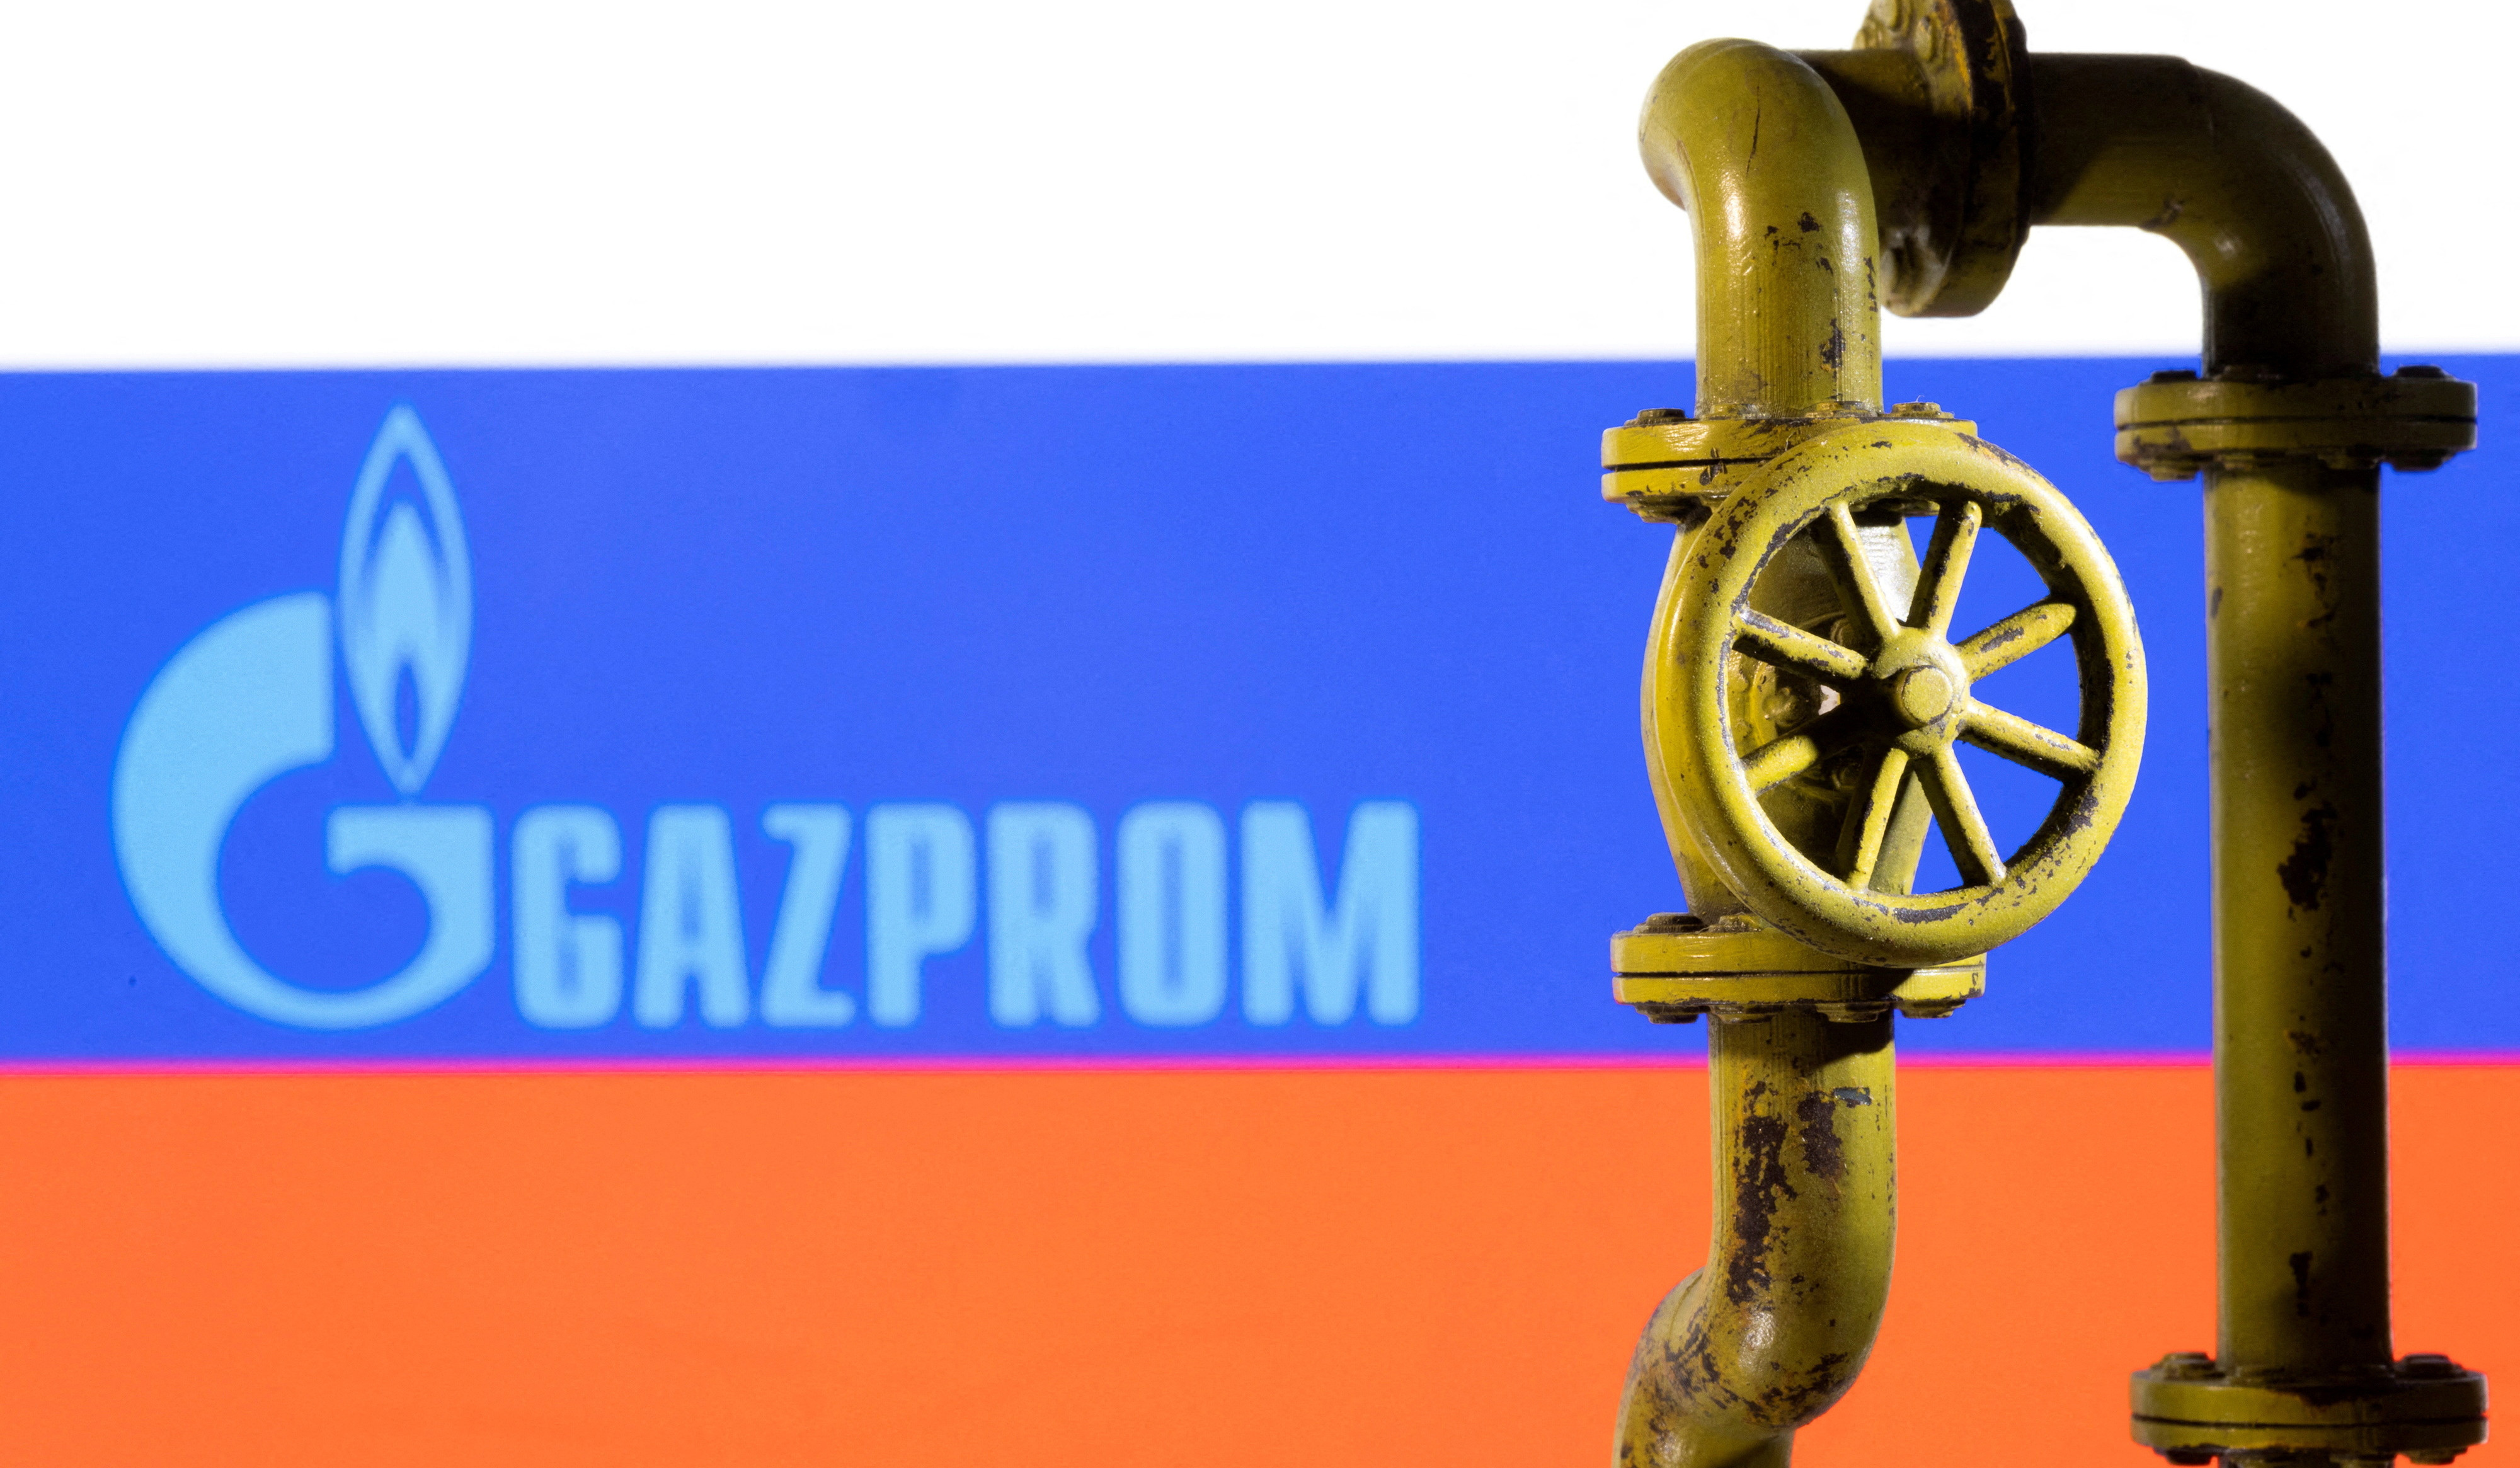 Gazprom is supplying as much gas to Europe as possible: Kremlin